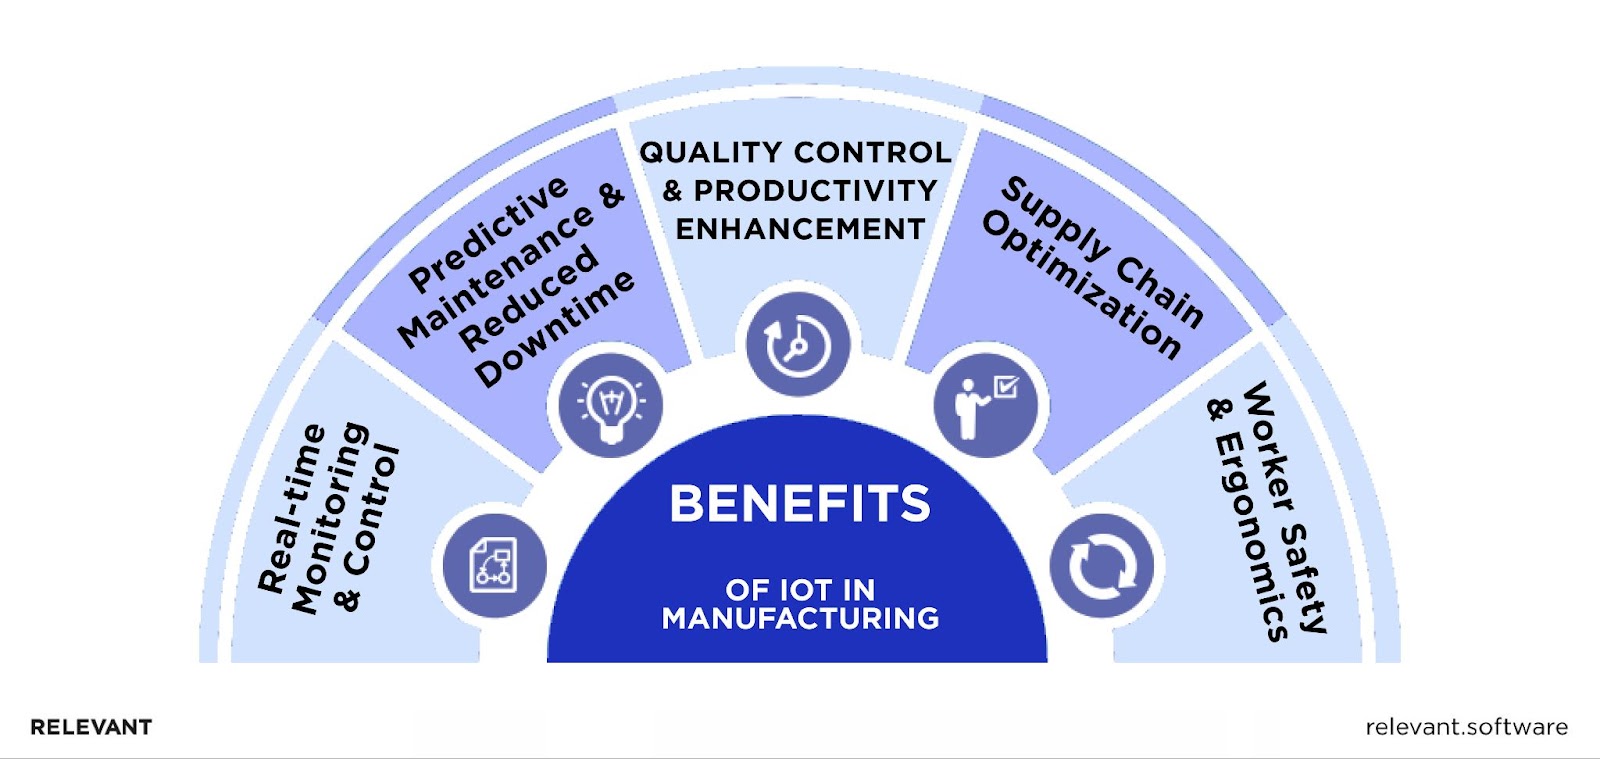 Benefits of IoT in Manufacturing